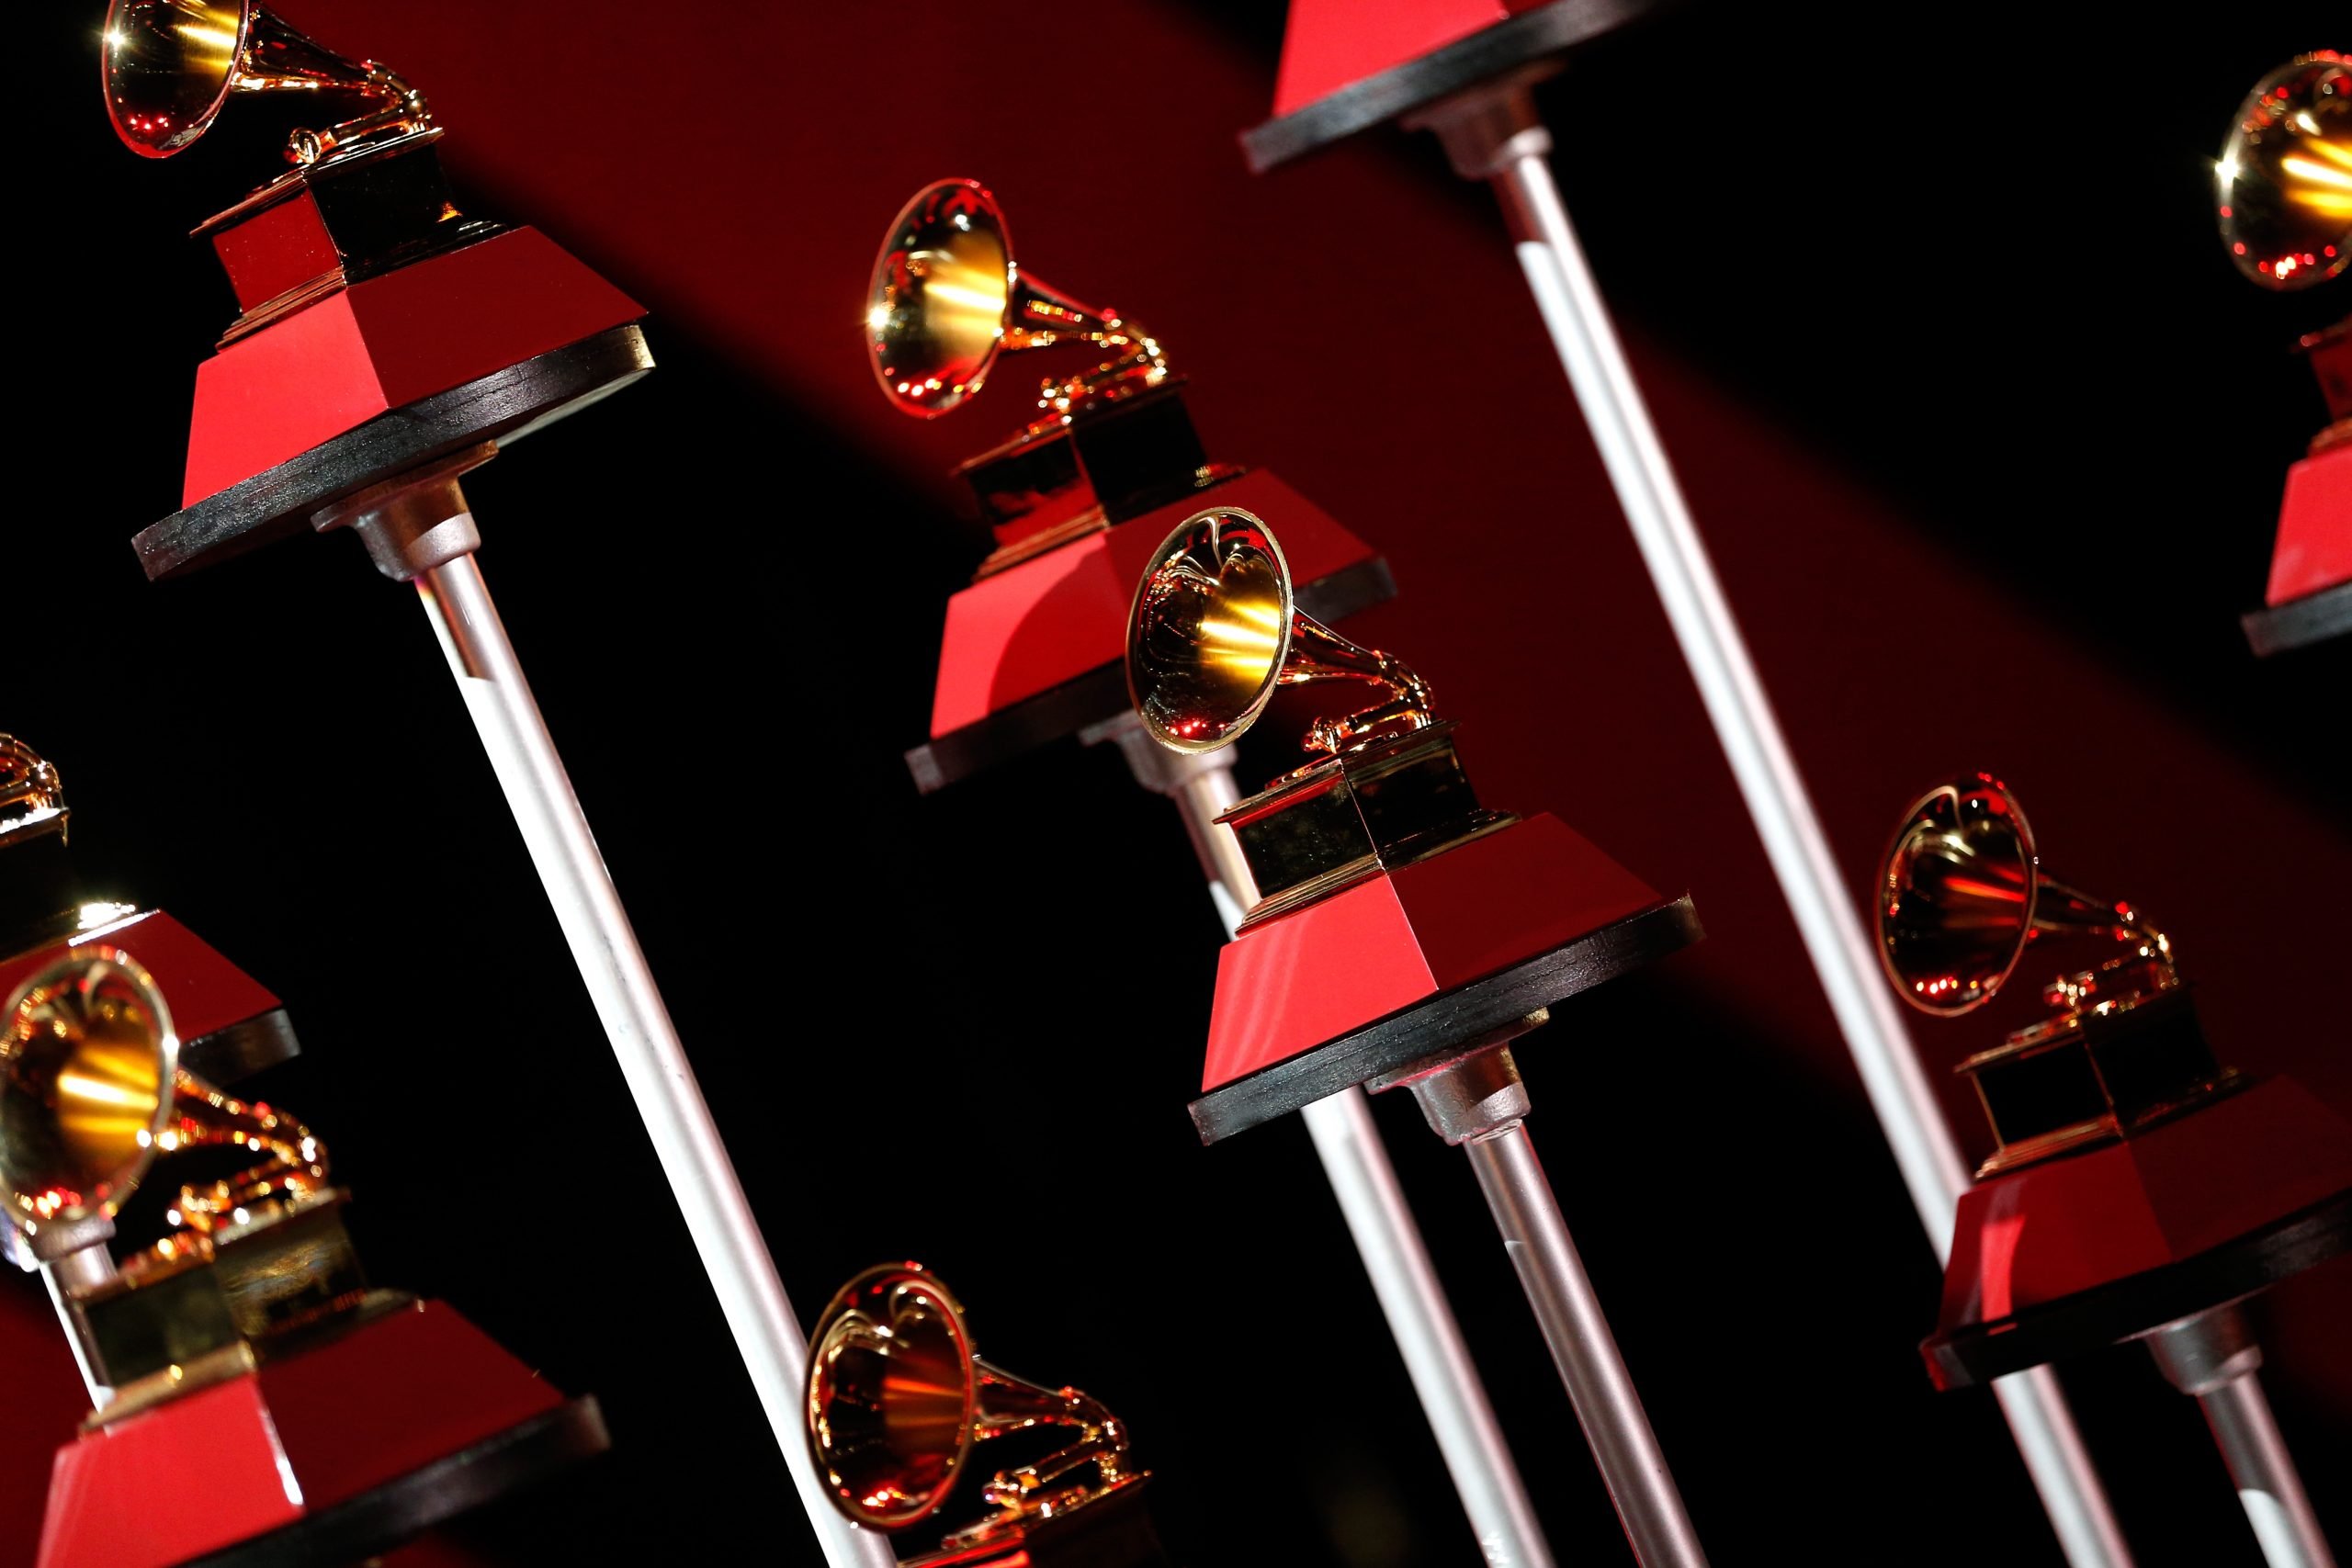 A photo of multiple Latin Grammy award trophies on stands